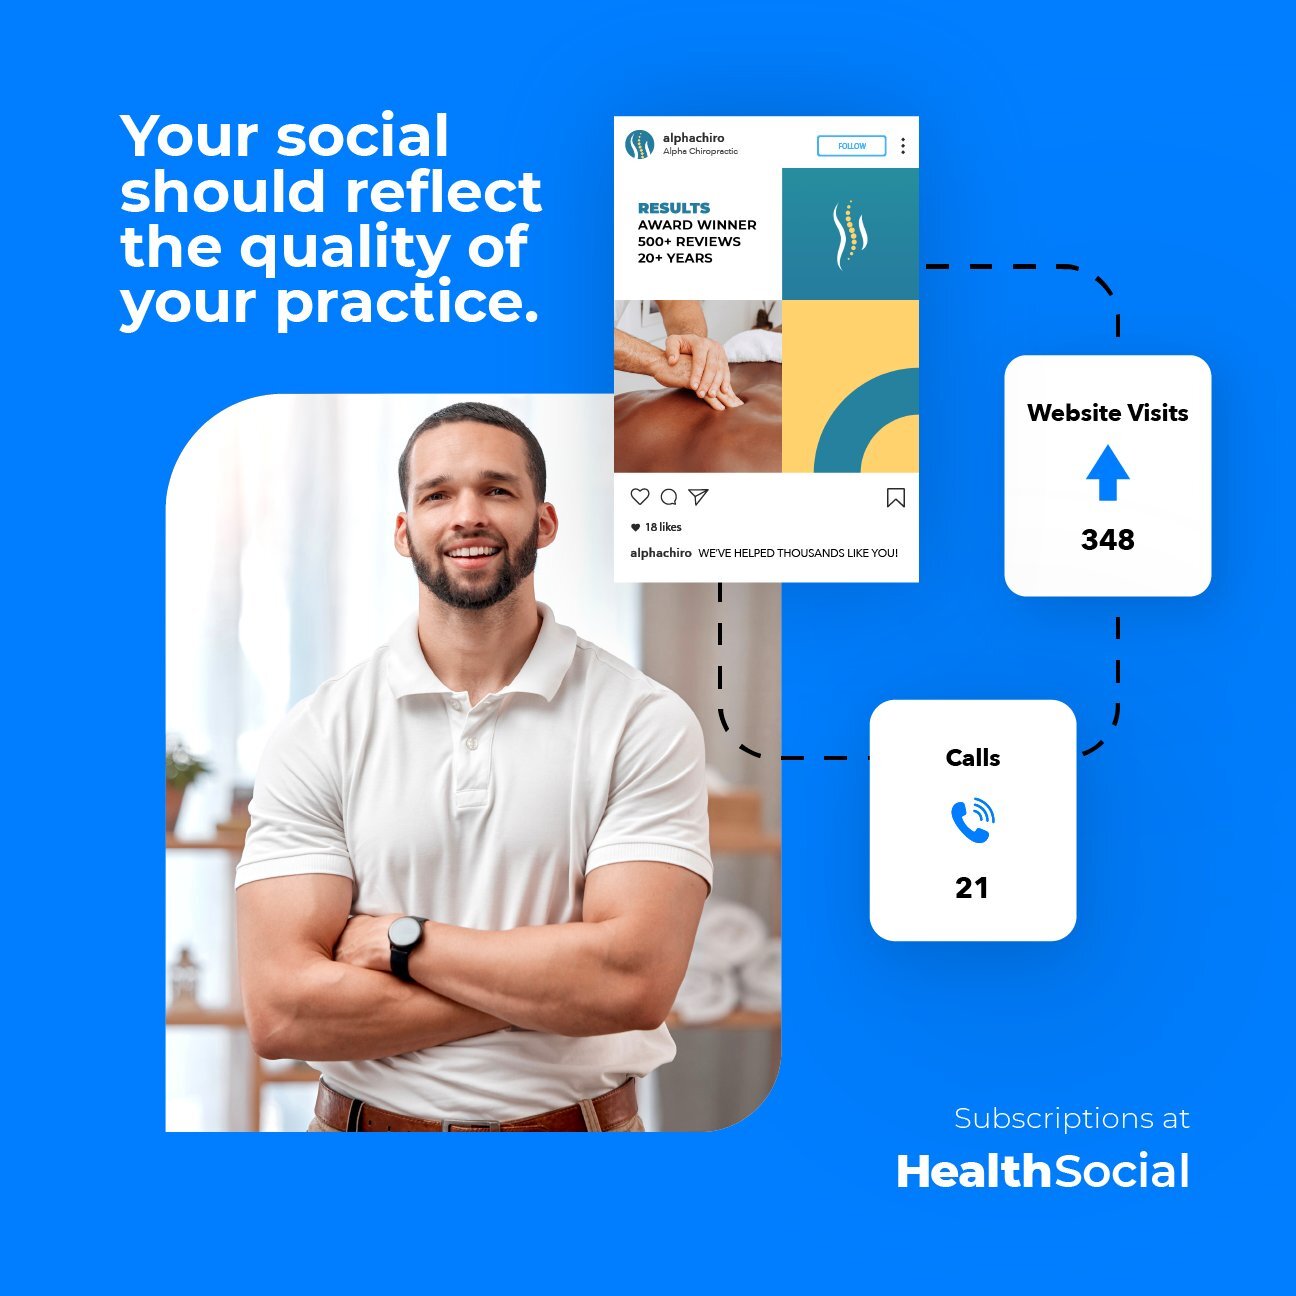 Our all-in-one marketing subscriptions, for healthcare providers and professionals, are easy to get started!

We truly believe providers and professionals deserve social media marketing that reflects, at a minimum, the same superb quality and care th